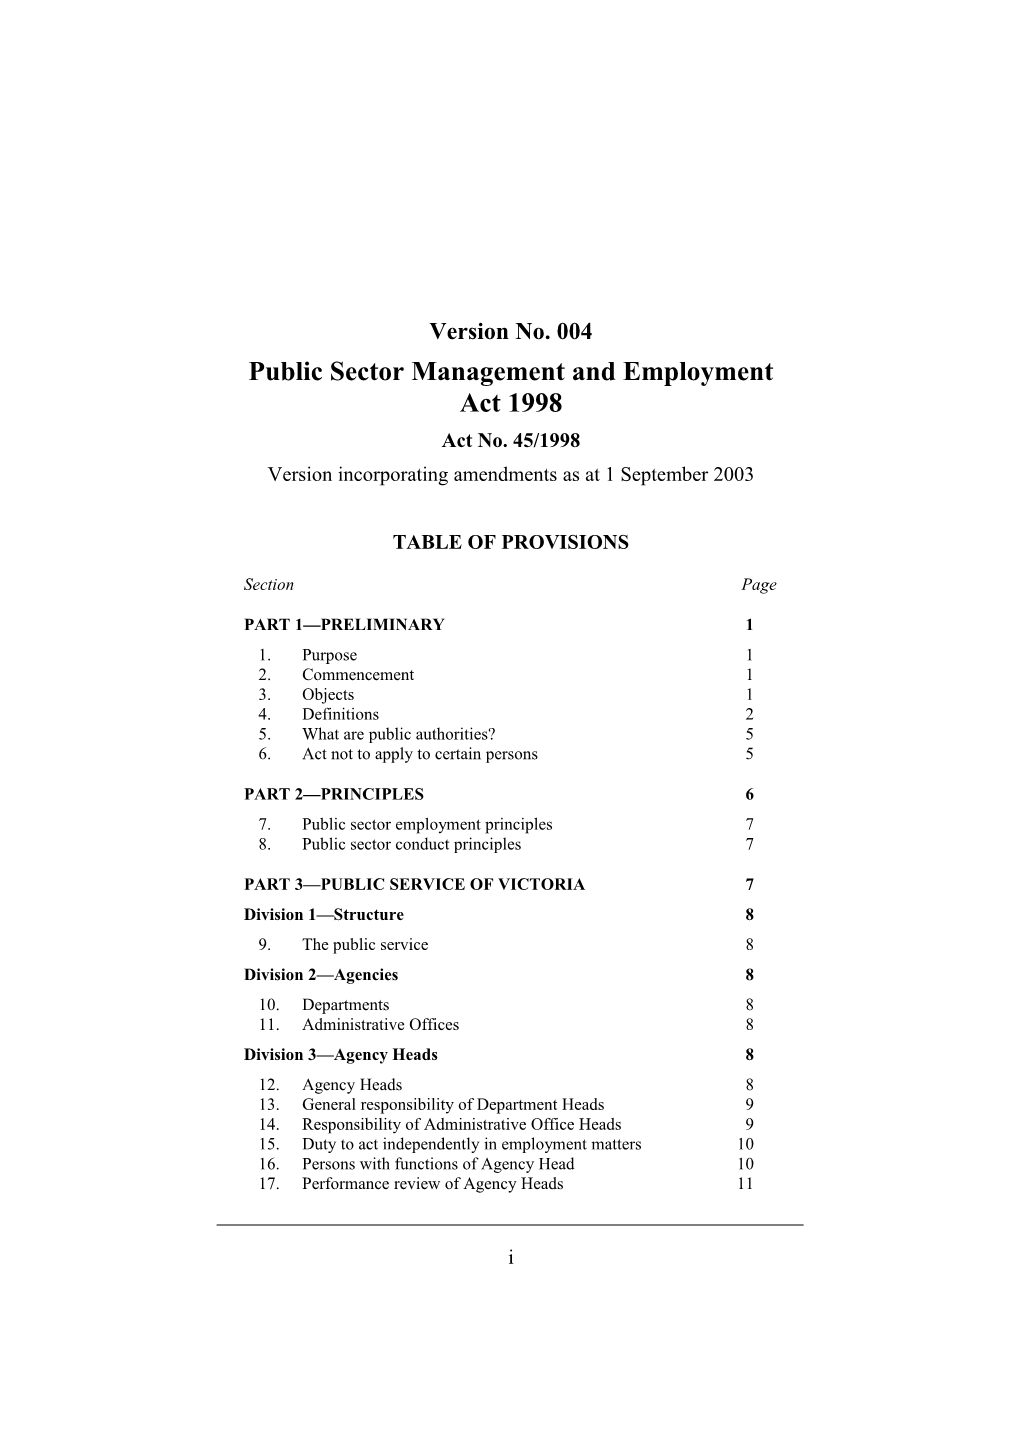 Public Sector Management and Employment Act 1998